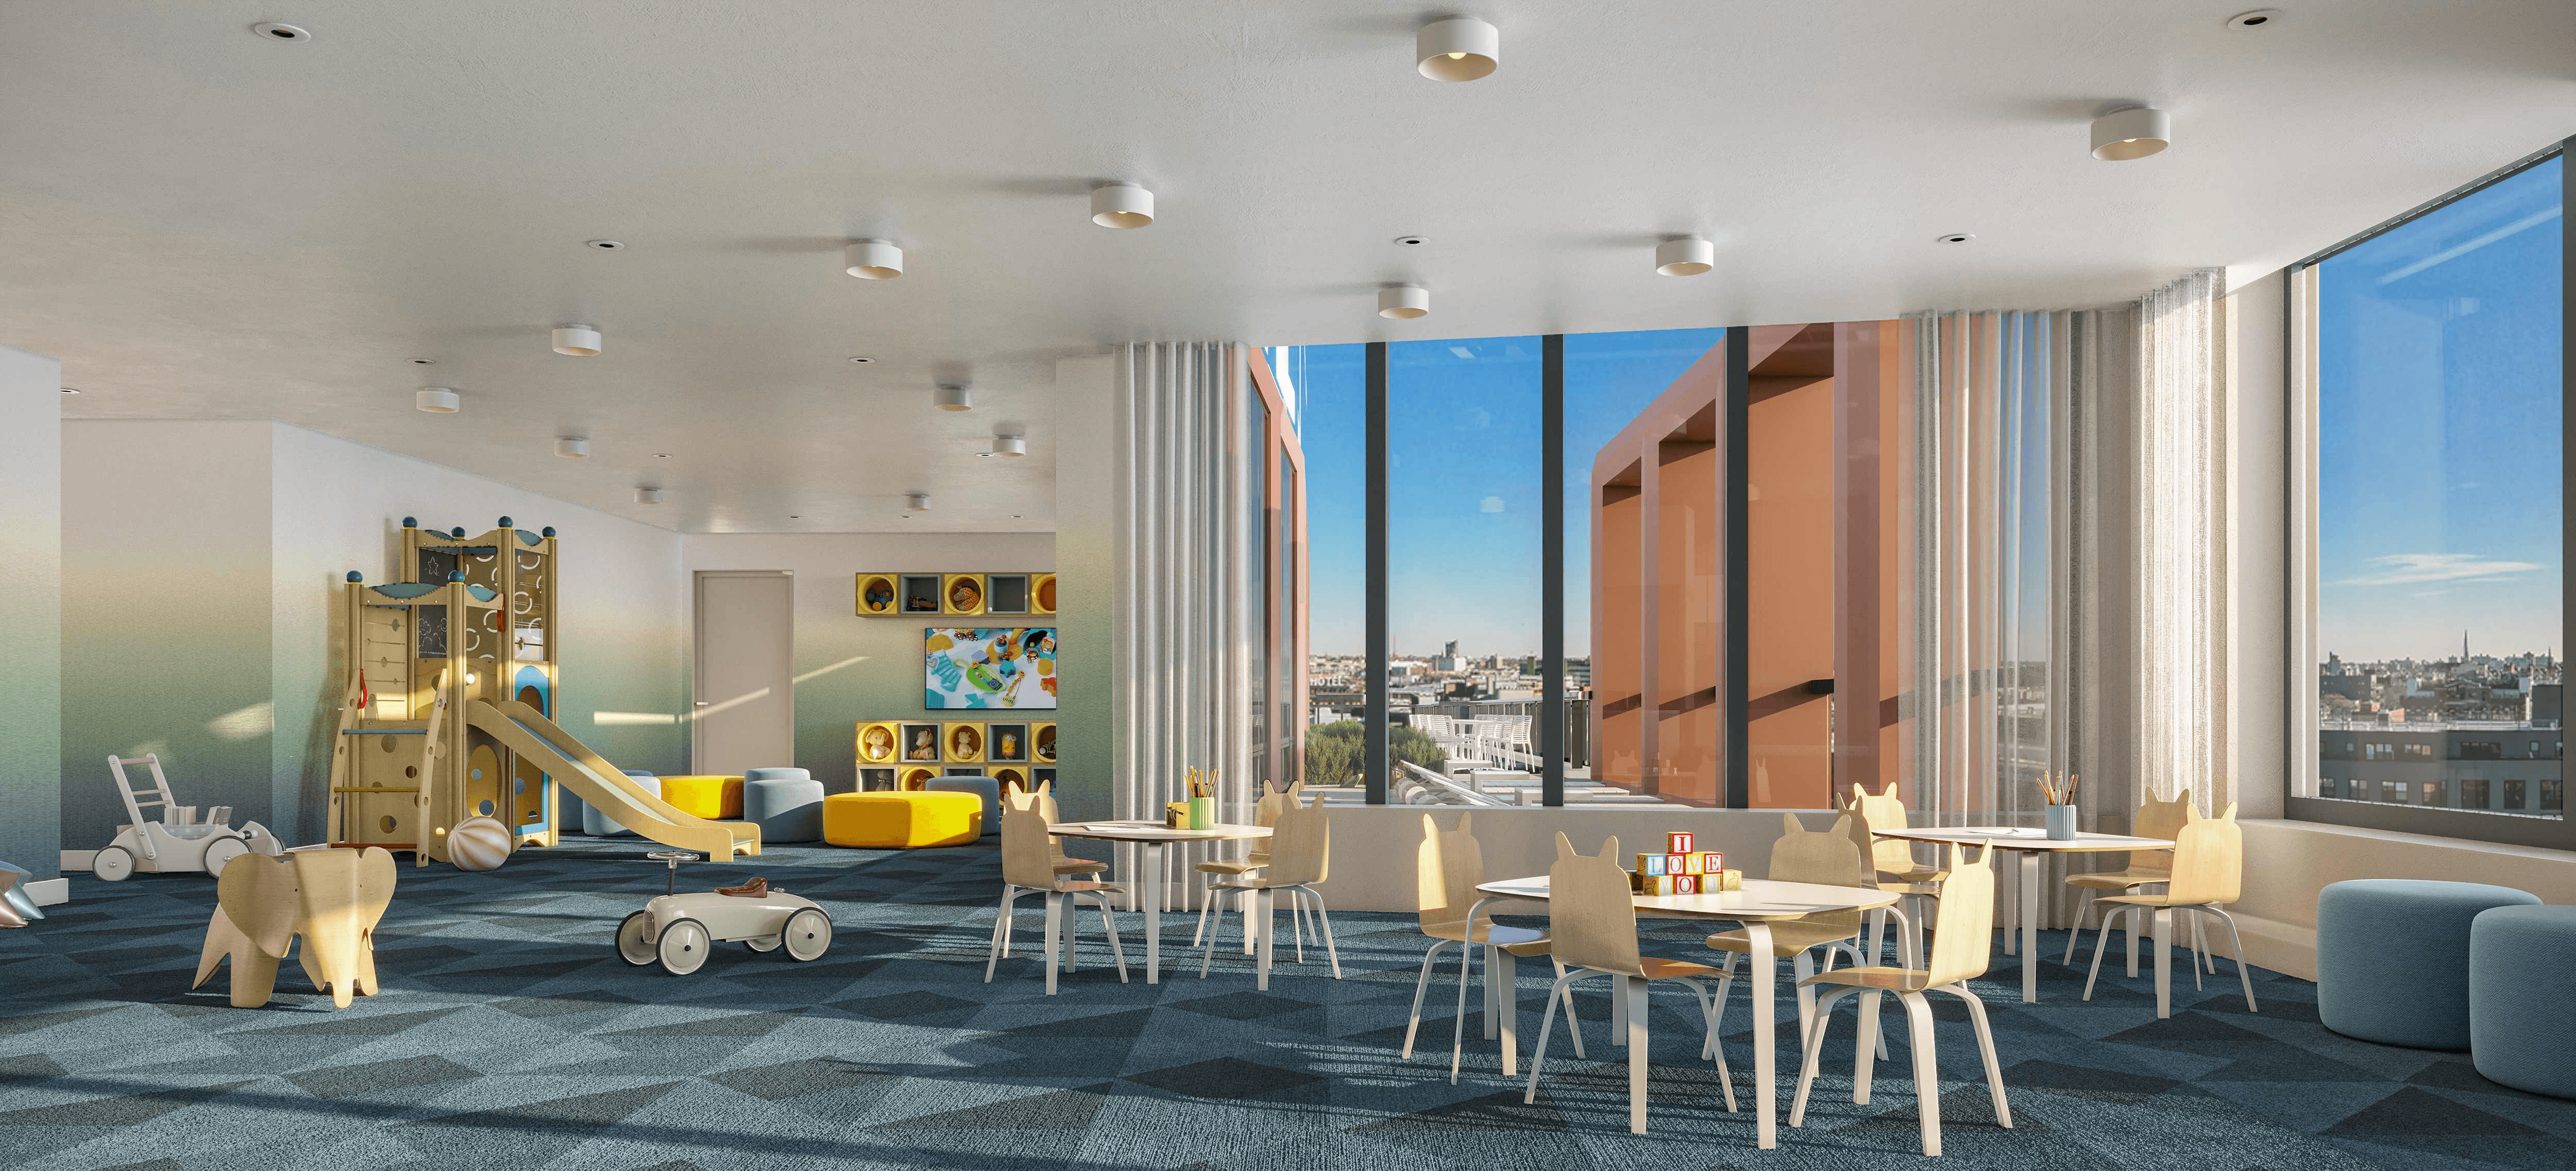 rendering of a play room with carpeting and floor to ceiling windows